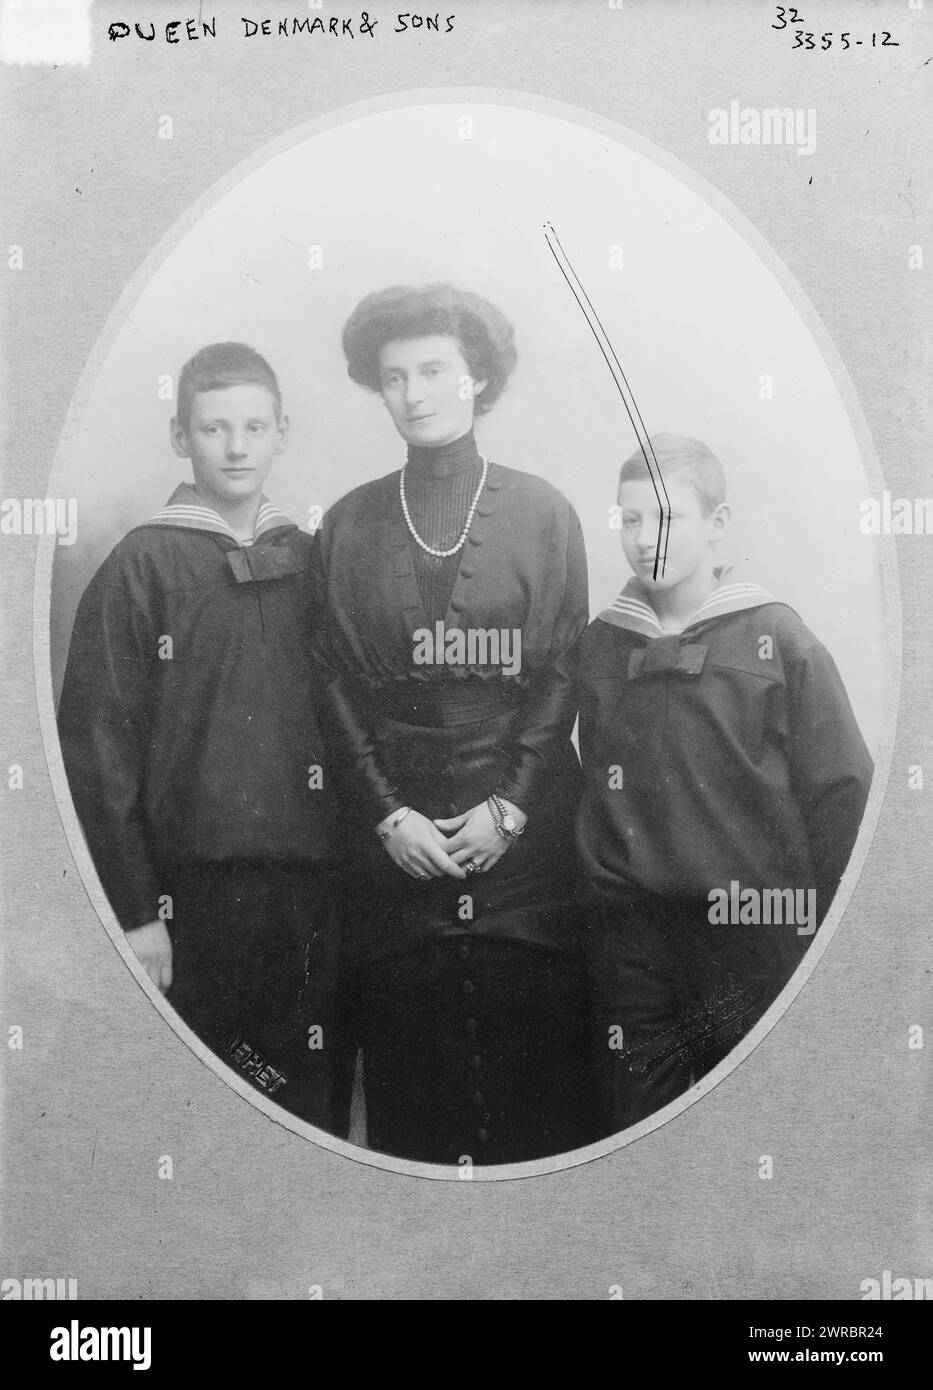 Queen Denmark & sons, Photograph shows Alexandrine Auguste of Mecklenburg-Schwerin (1879- 1952), queen consort of King Christian X of Denmark with her two sons, Frederick IX (1899-1972) who was King of Denmark (1947-1972) and Knud, Hereditary Prince of Denmark (1900-1976)., between ca. 1910 and ca. 1915, Glass negatives, 1 negative: glass Stock Photo